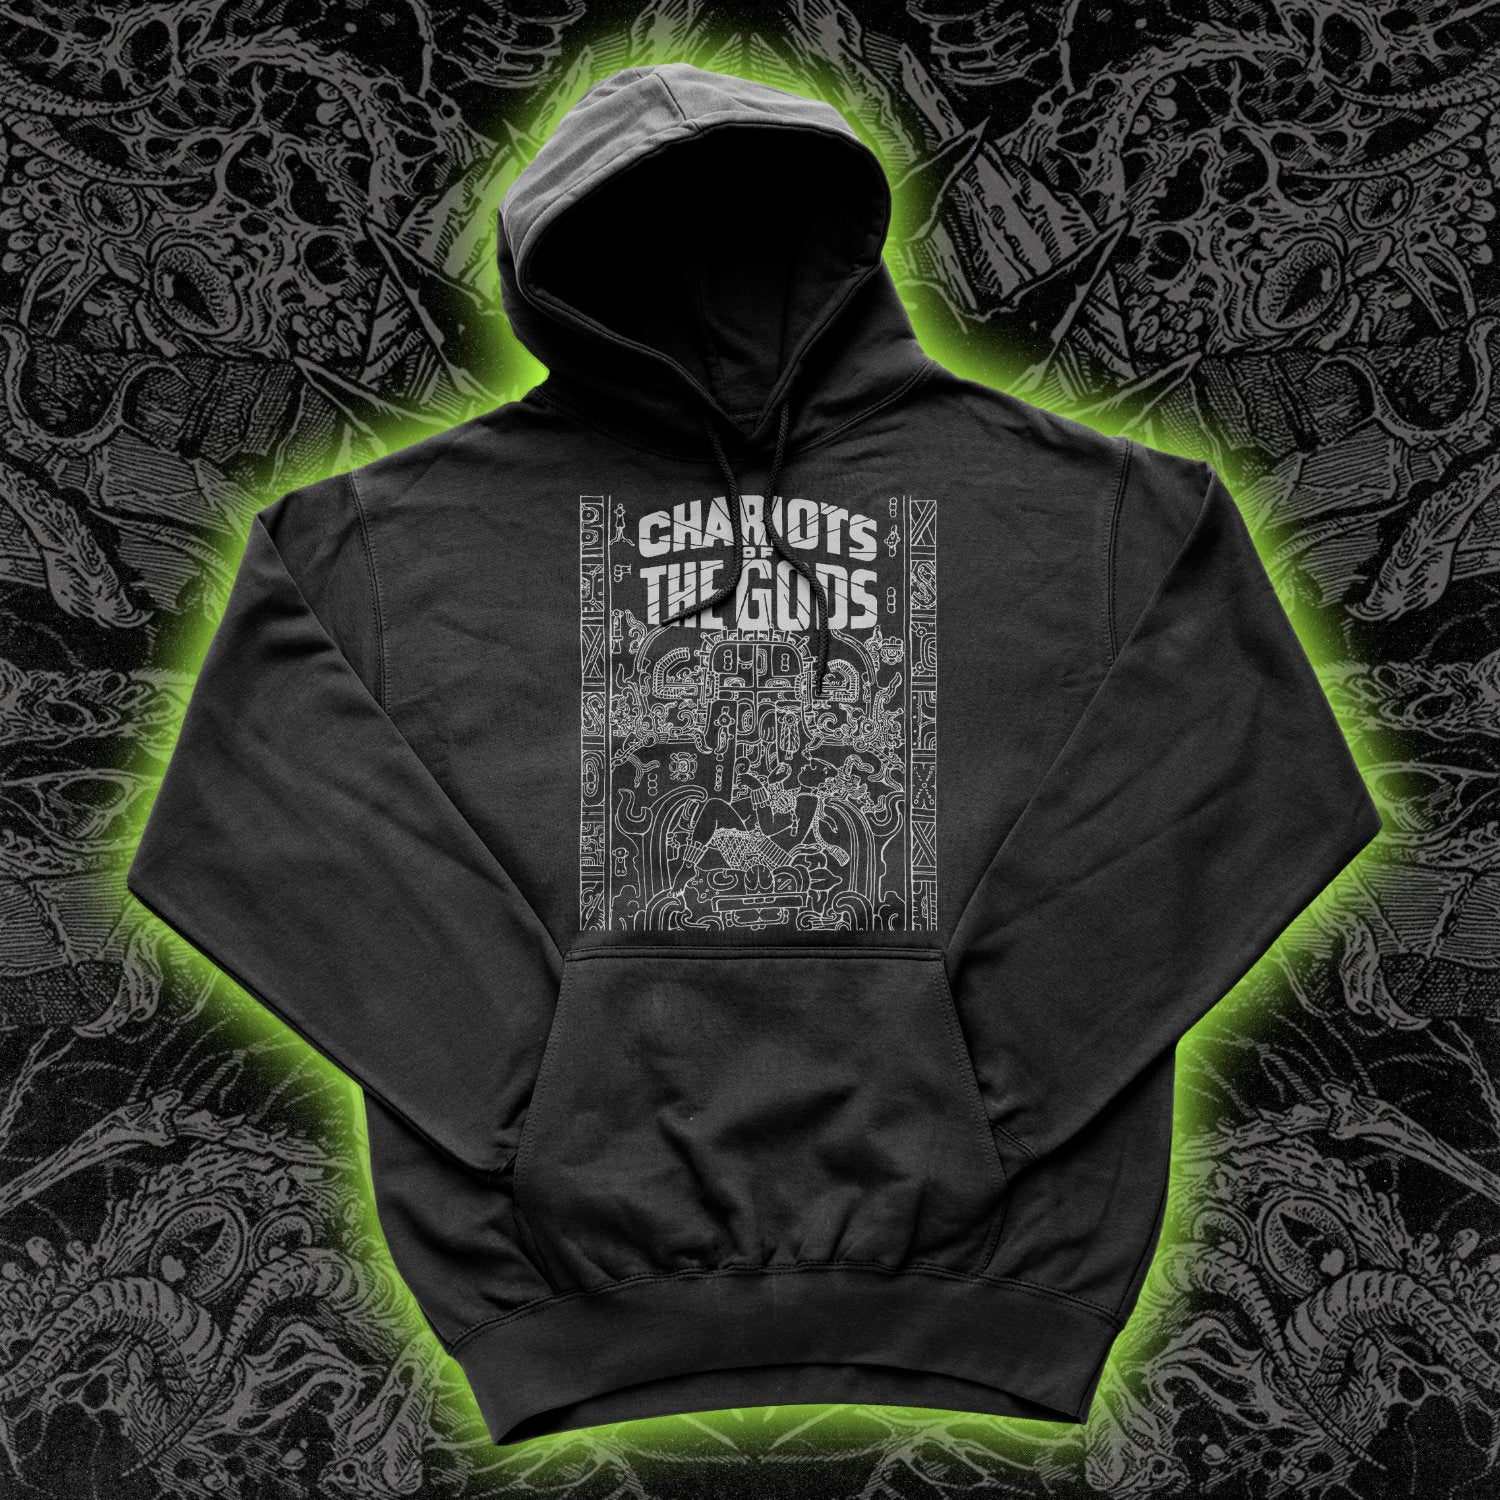 Chariots Of The Gods Hoodie